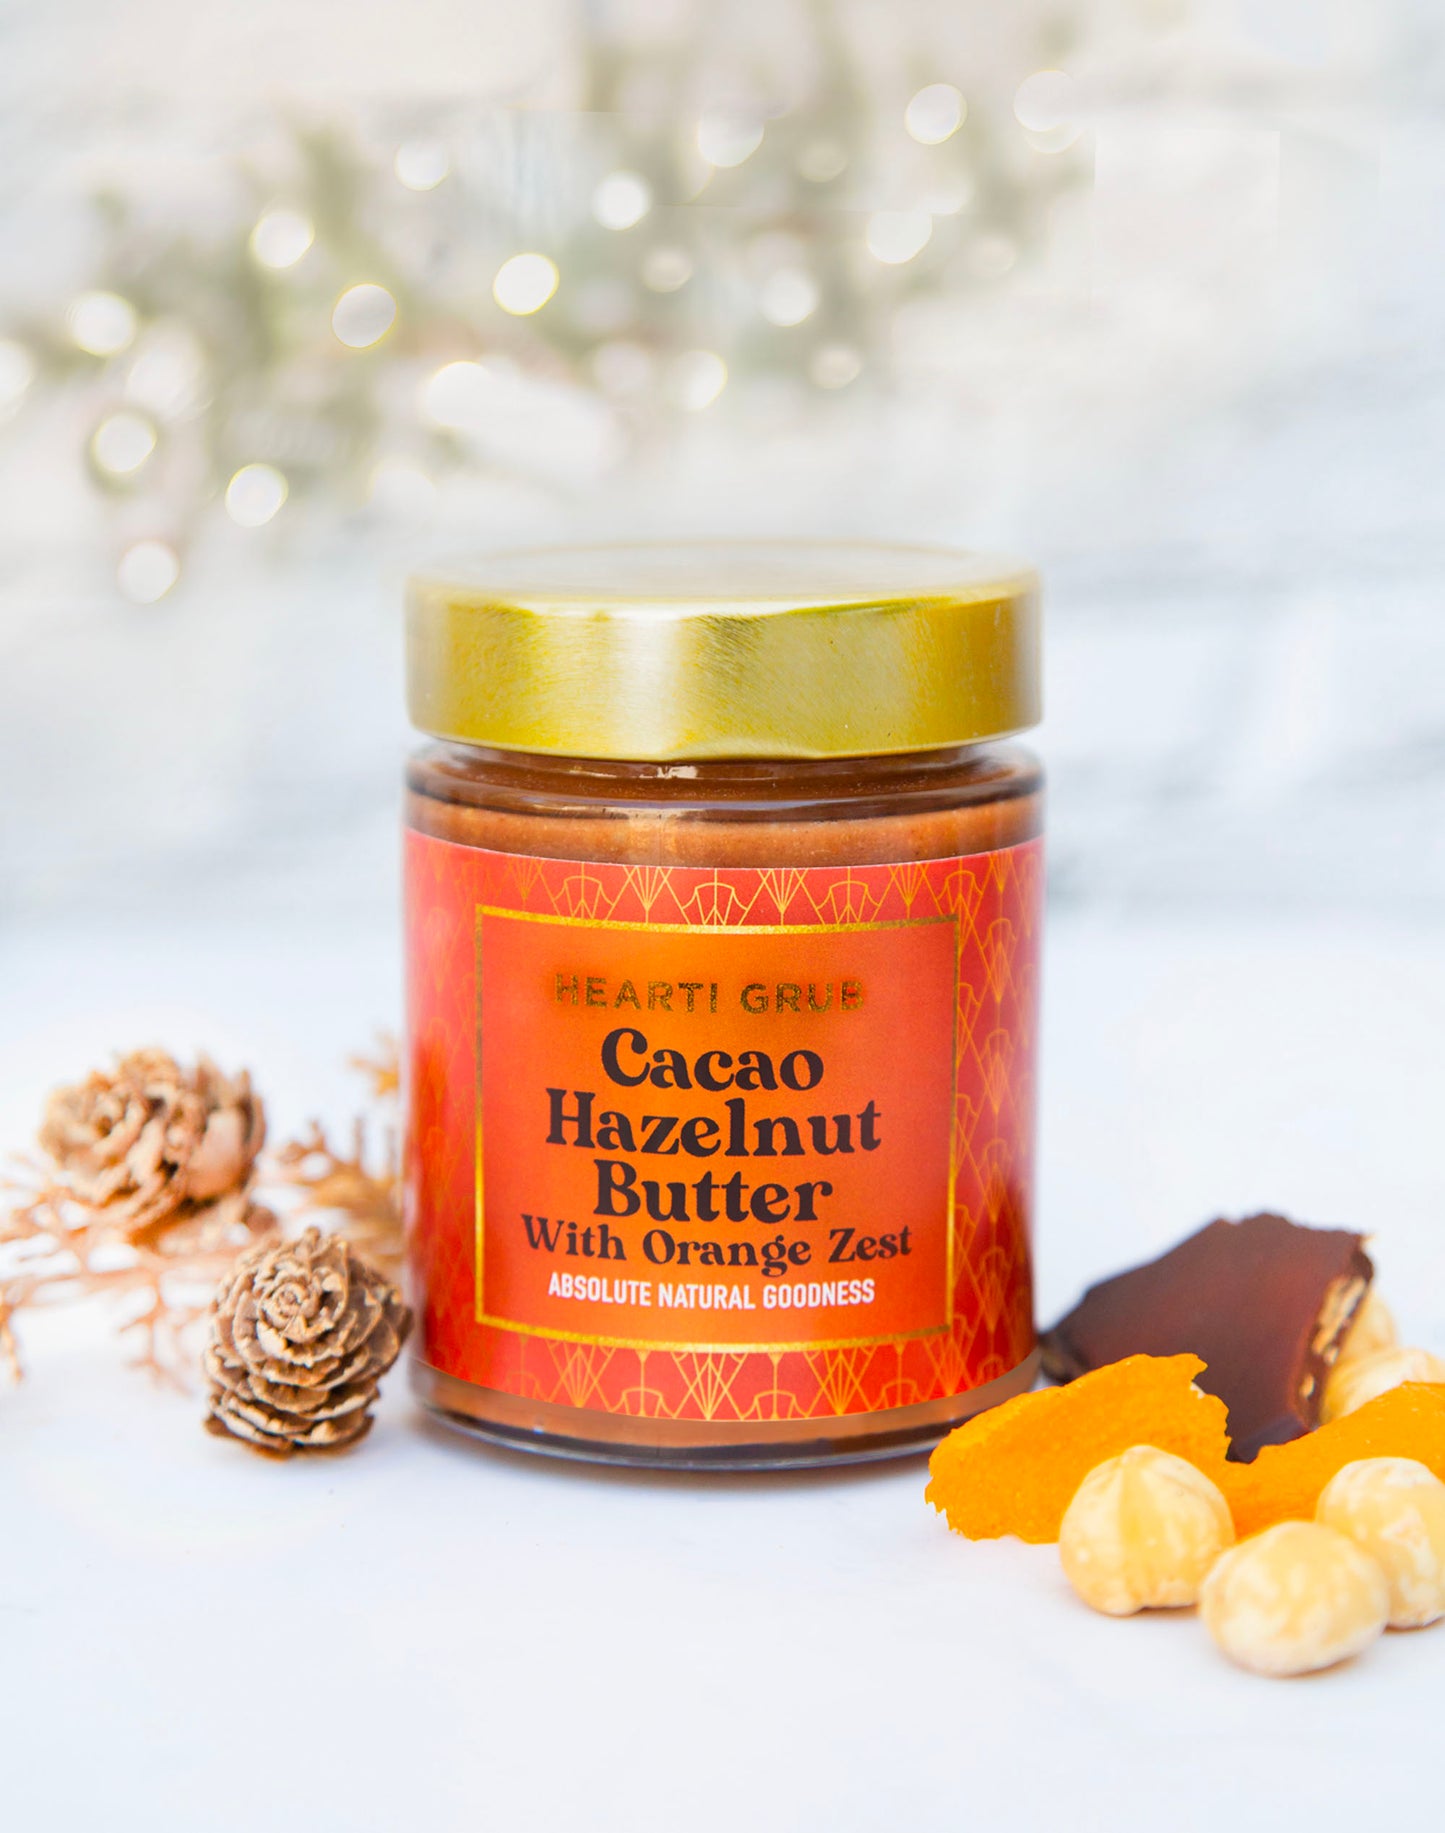 CACAO HAZELNUT BUTTER by HEARTIGRUB. RAW CACAO, TURKISH HAZELNUTS, HINT OF HONEY. THE BETTER HAZELNUT BUTTER WITH ORANGE ZEST By HEARTIGRUB. Made in Dubai, UAE. Nut Butter s and Spreads. Gift Delivery in UAE